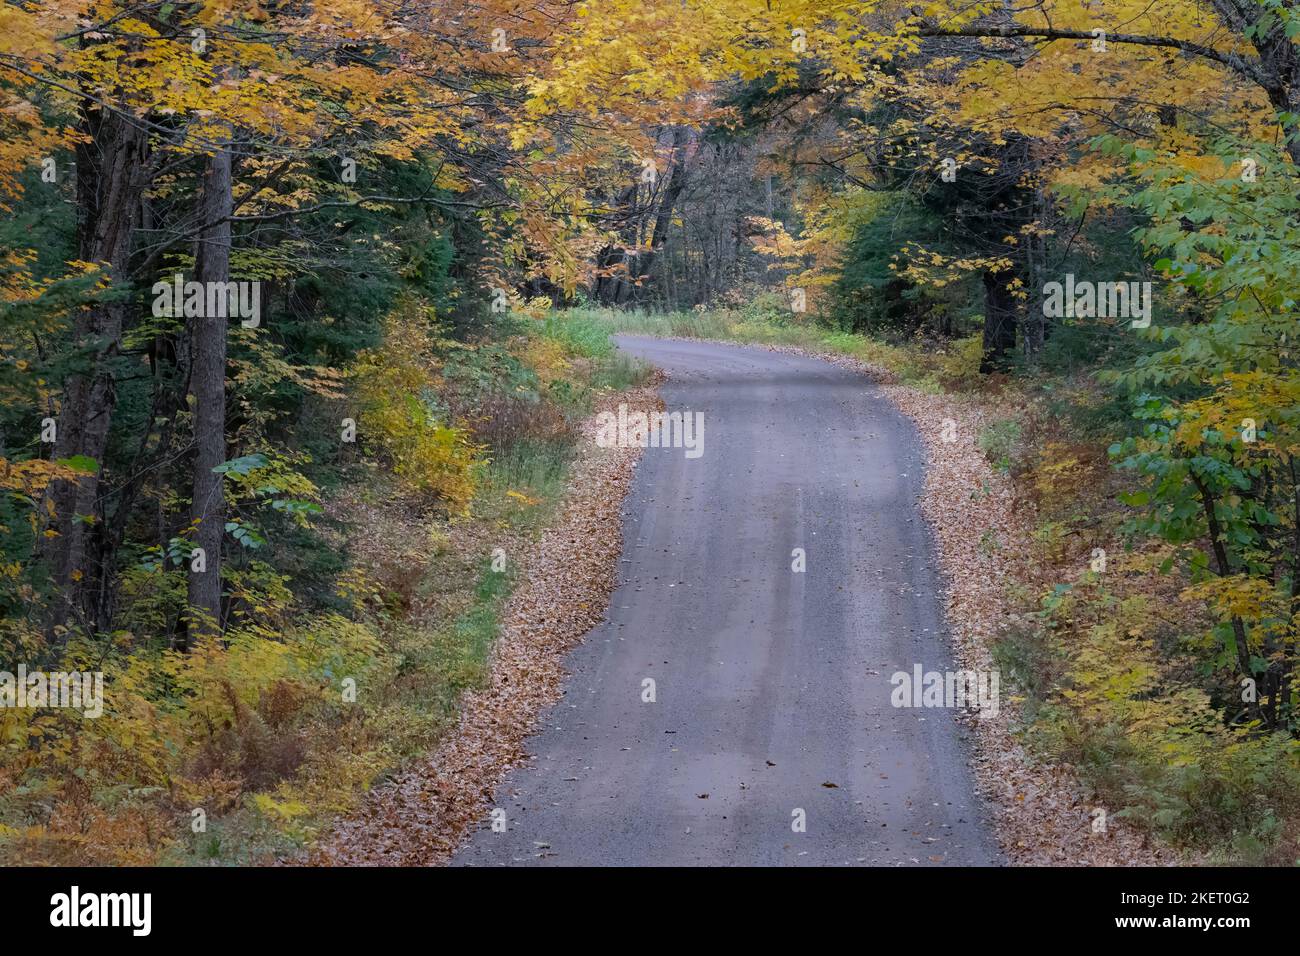 The forest service roads in the Chequamegon-Nicolet national forest in Northern Wisconsin come alive with color in late September early October. Stock Photo